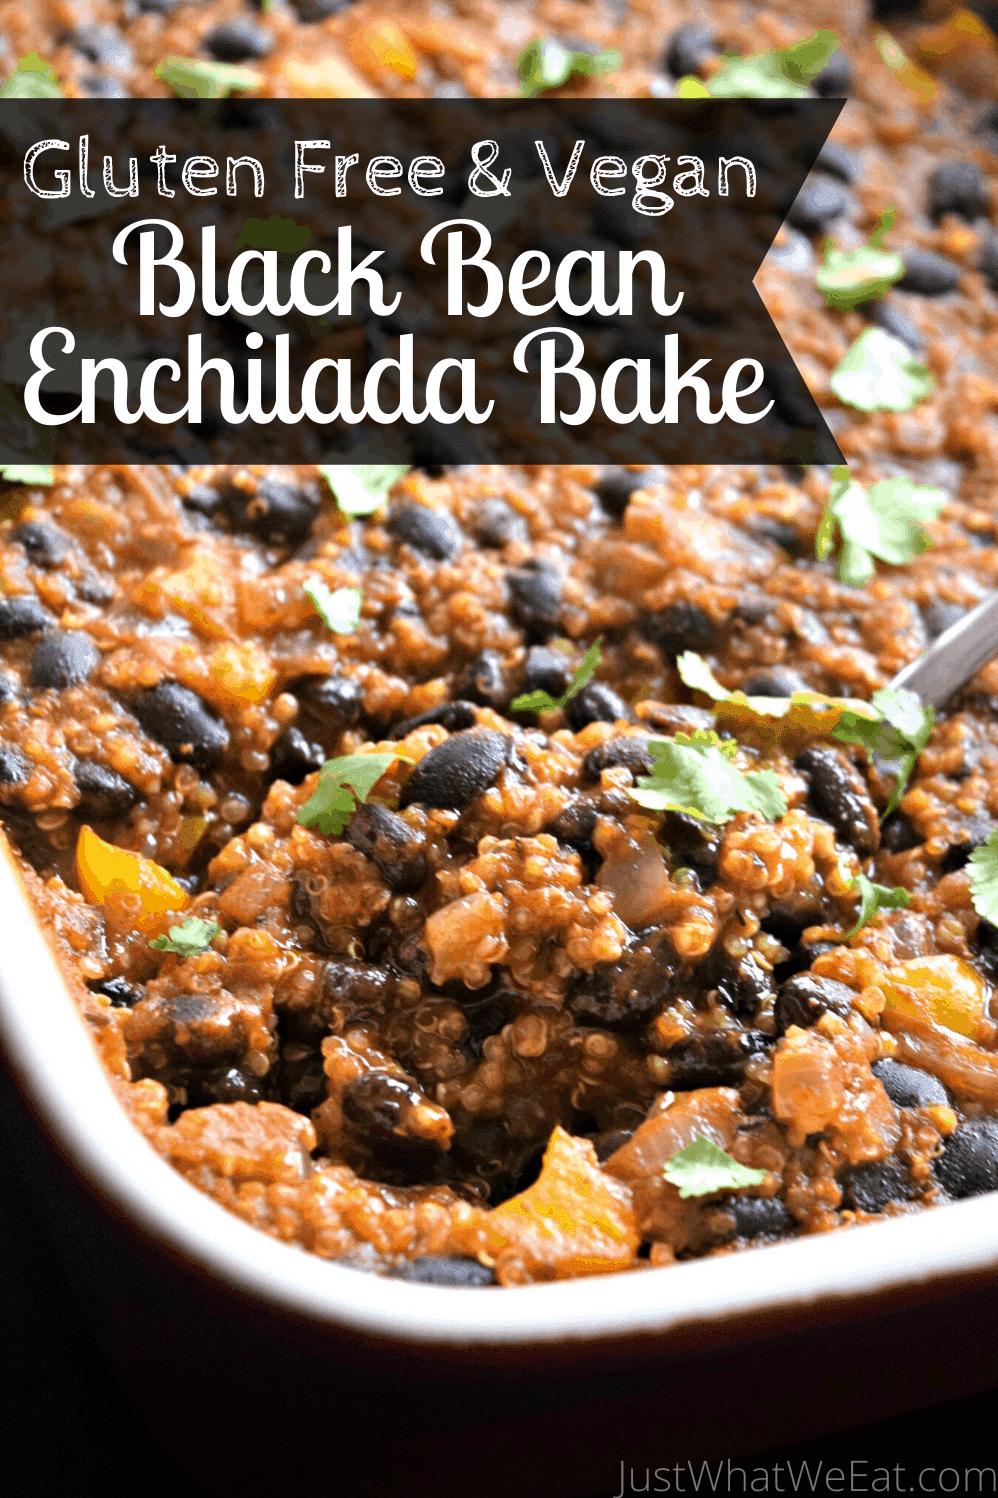  These enchiladas are so delicious, you won't even miss the meat!